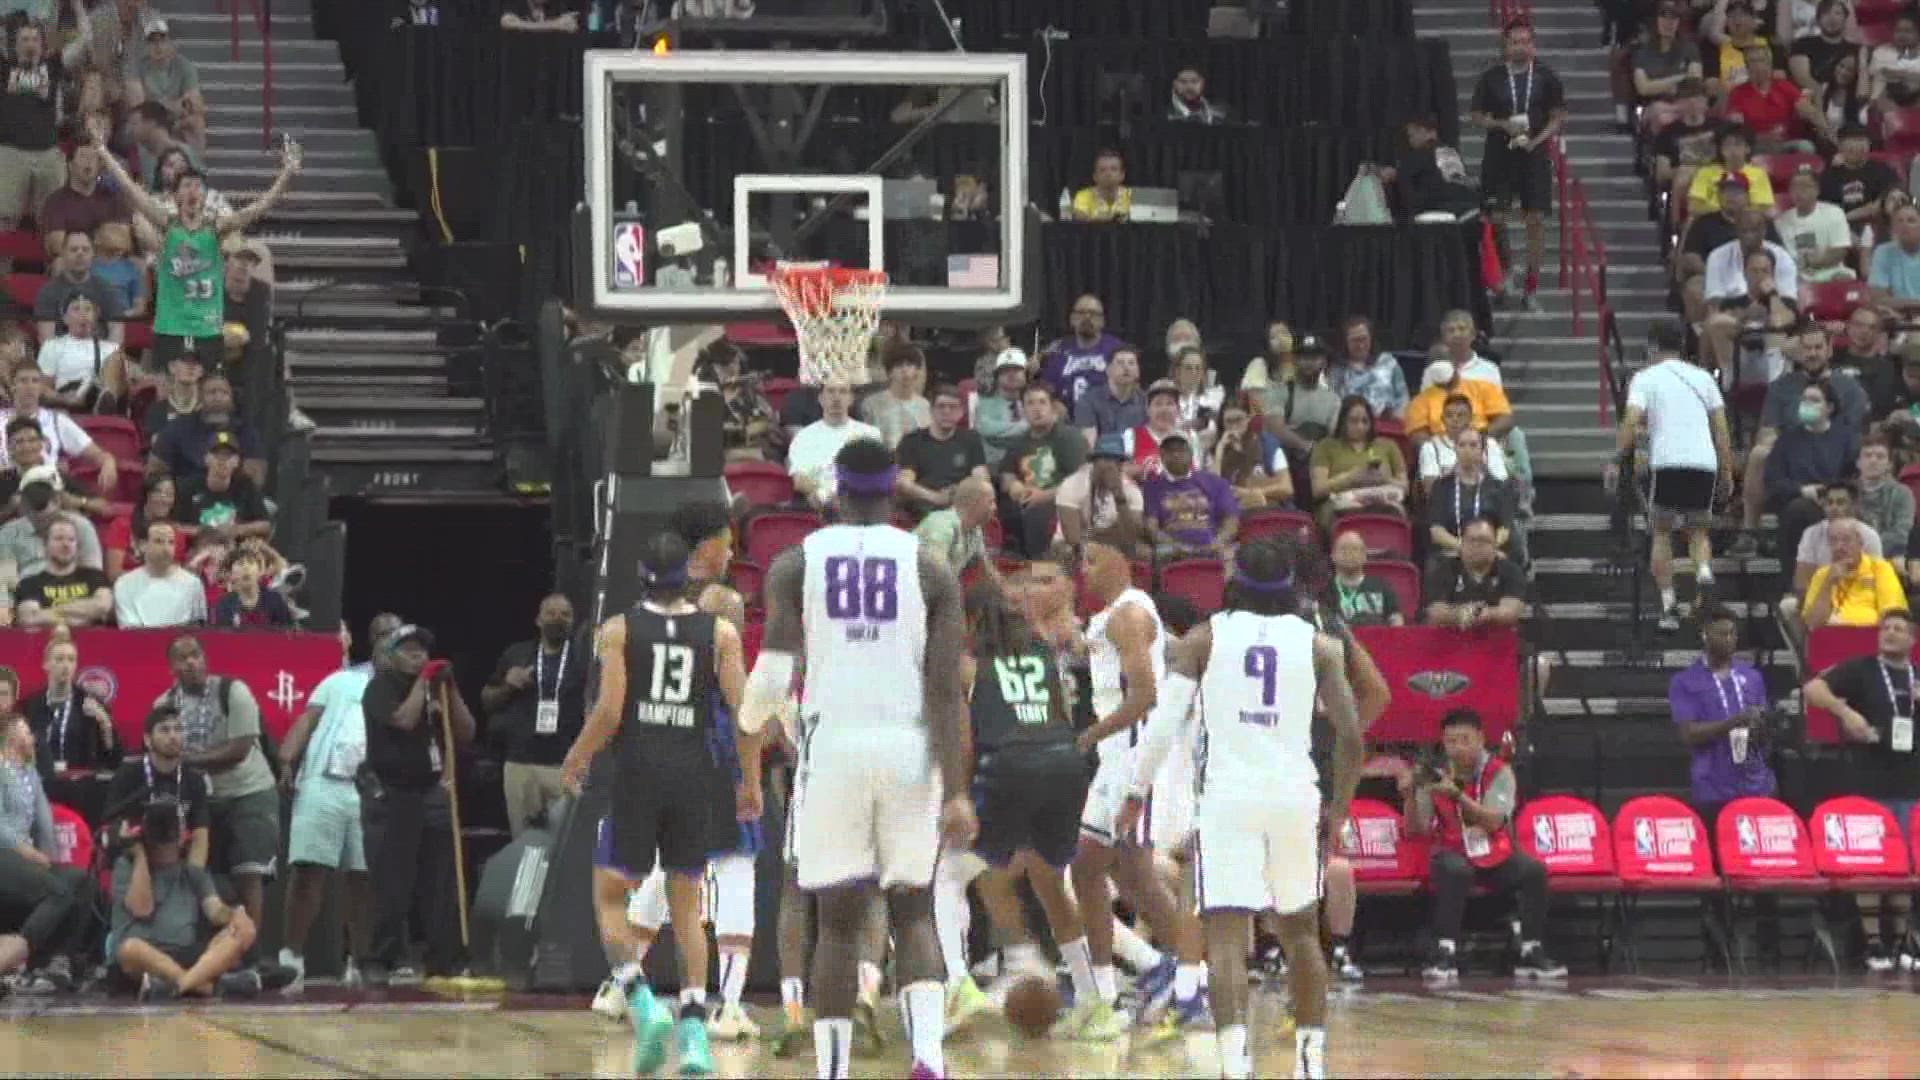 The Sacramento Kings and Orlando Magic battled in an NBA Summer League game for the ages.